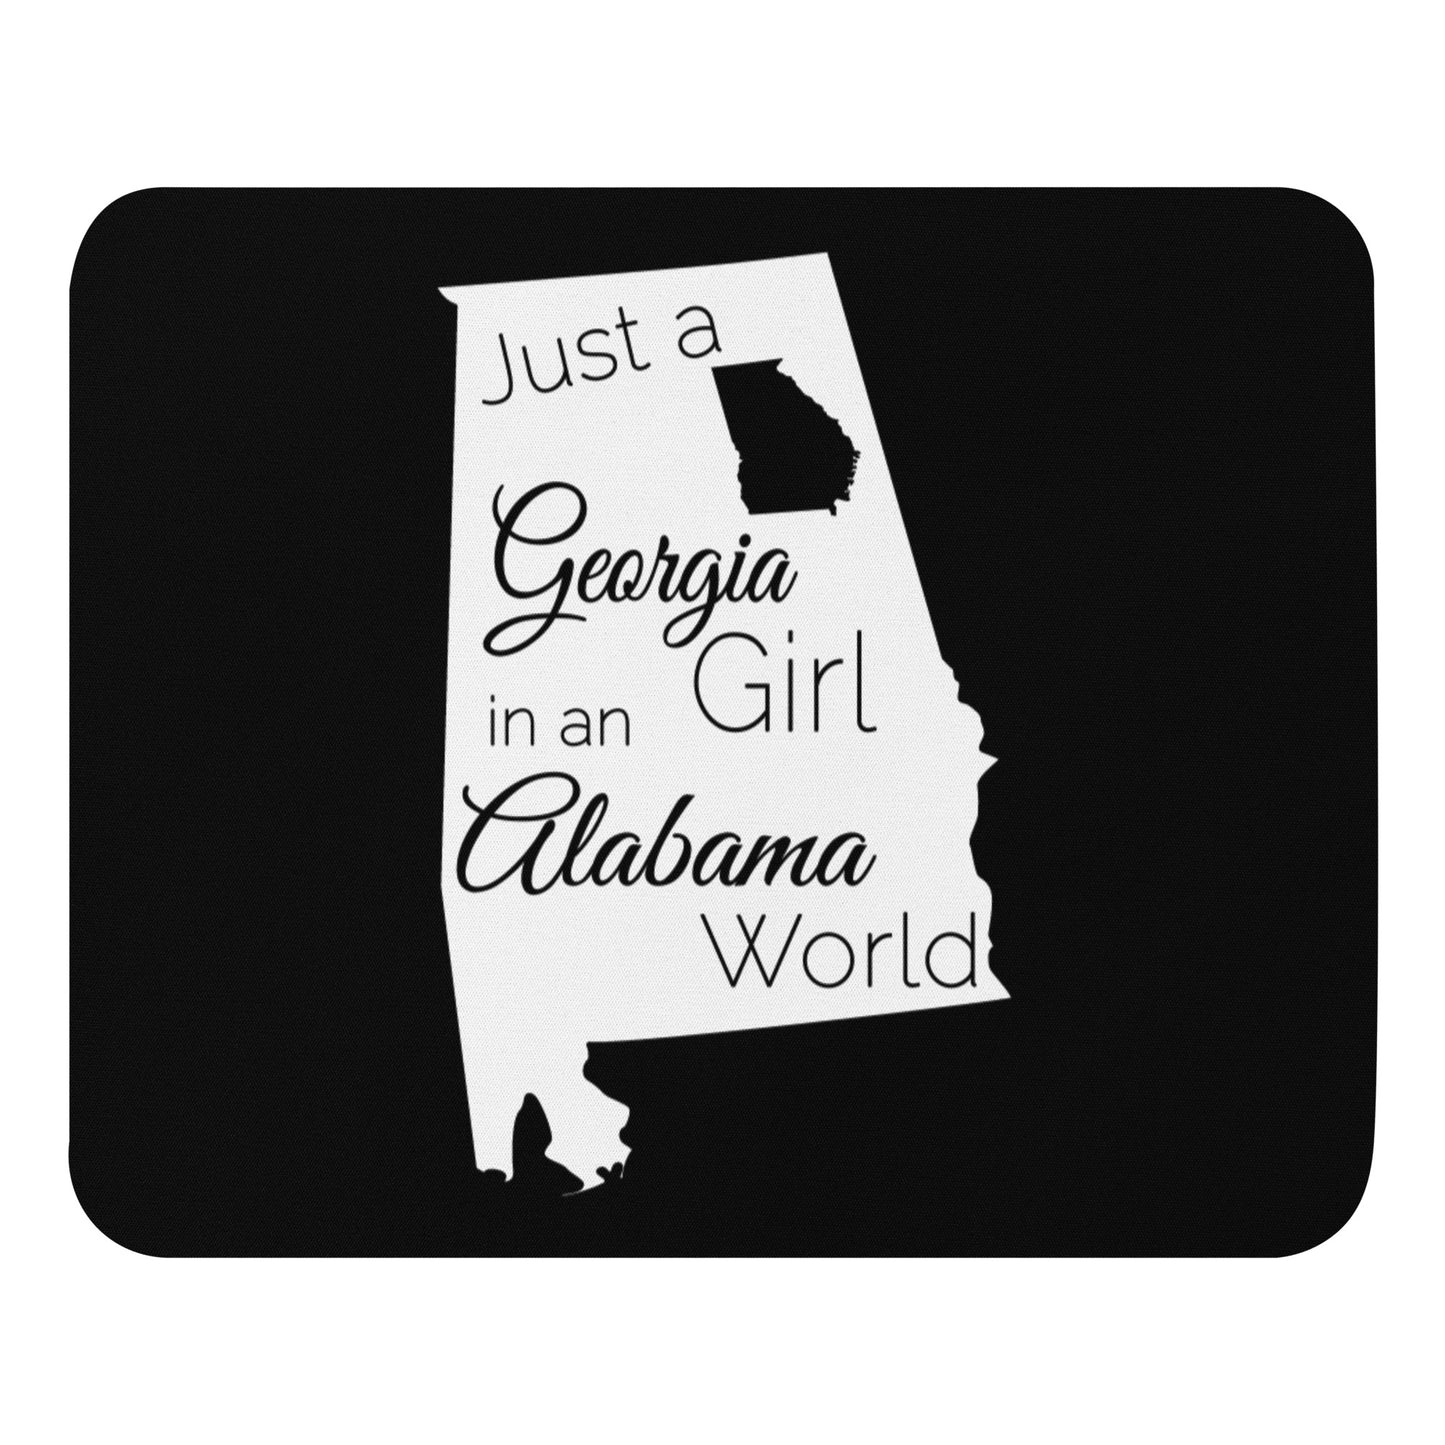 Just a Georgia Girl in an Alabama World Mouse pad